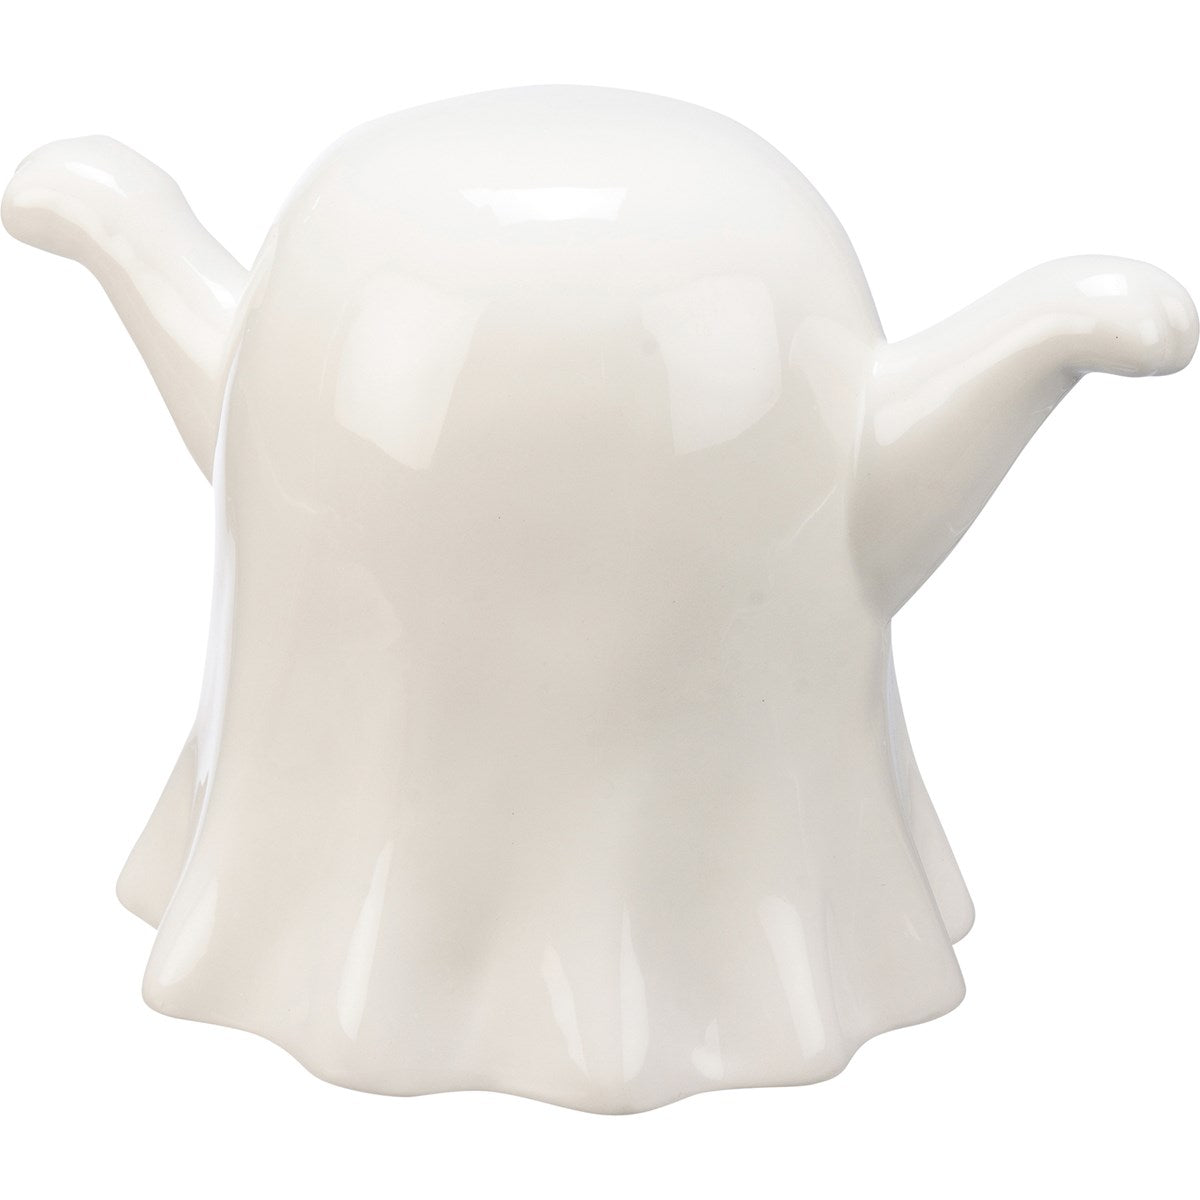 💙 Spooky Ghost 7.5" Ceramic Candle Holder